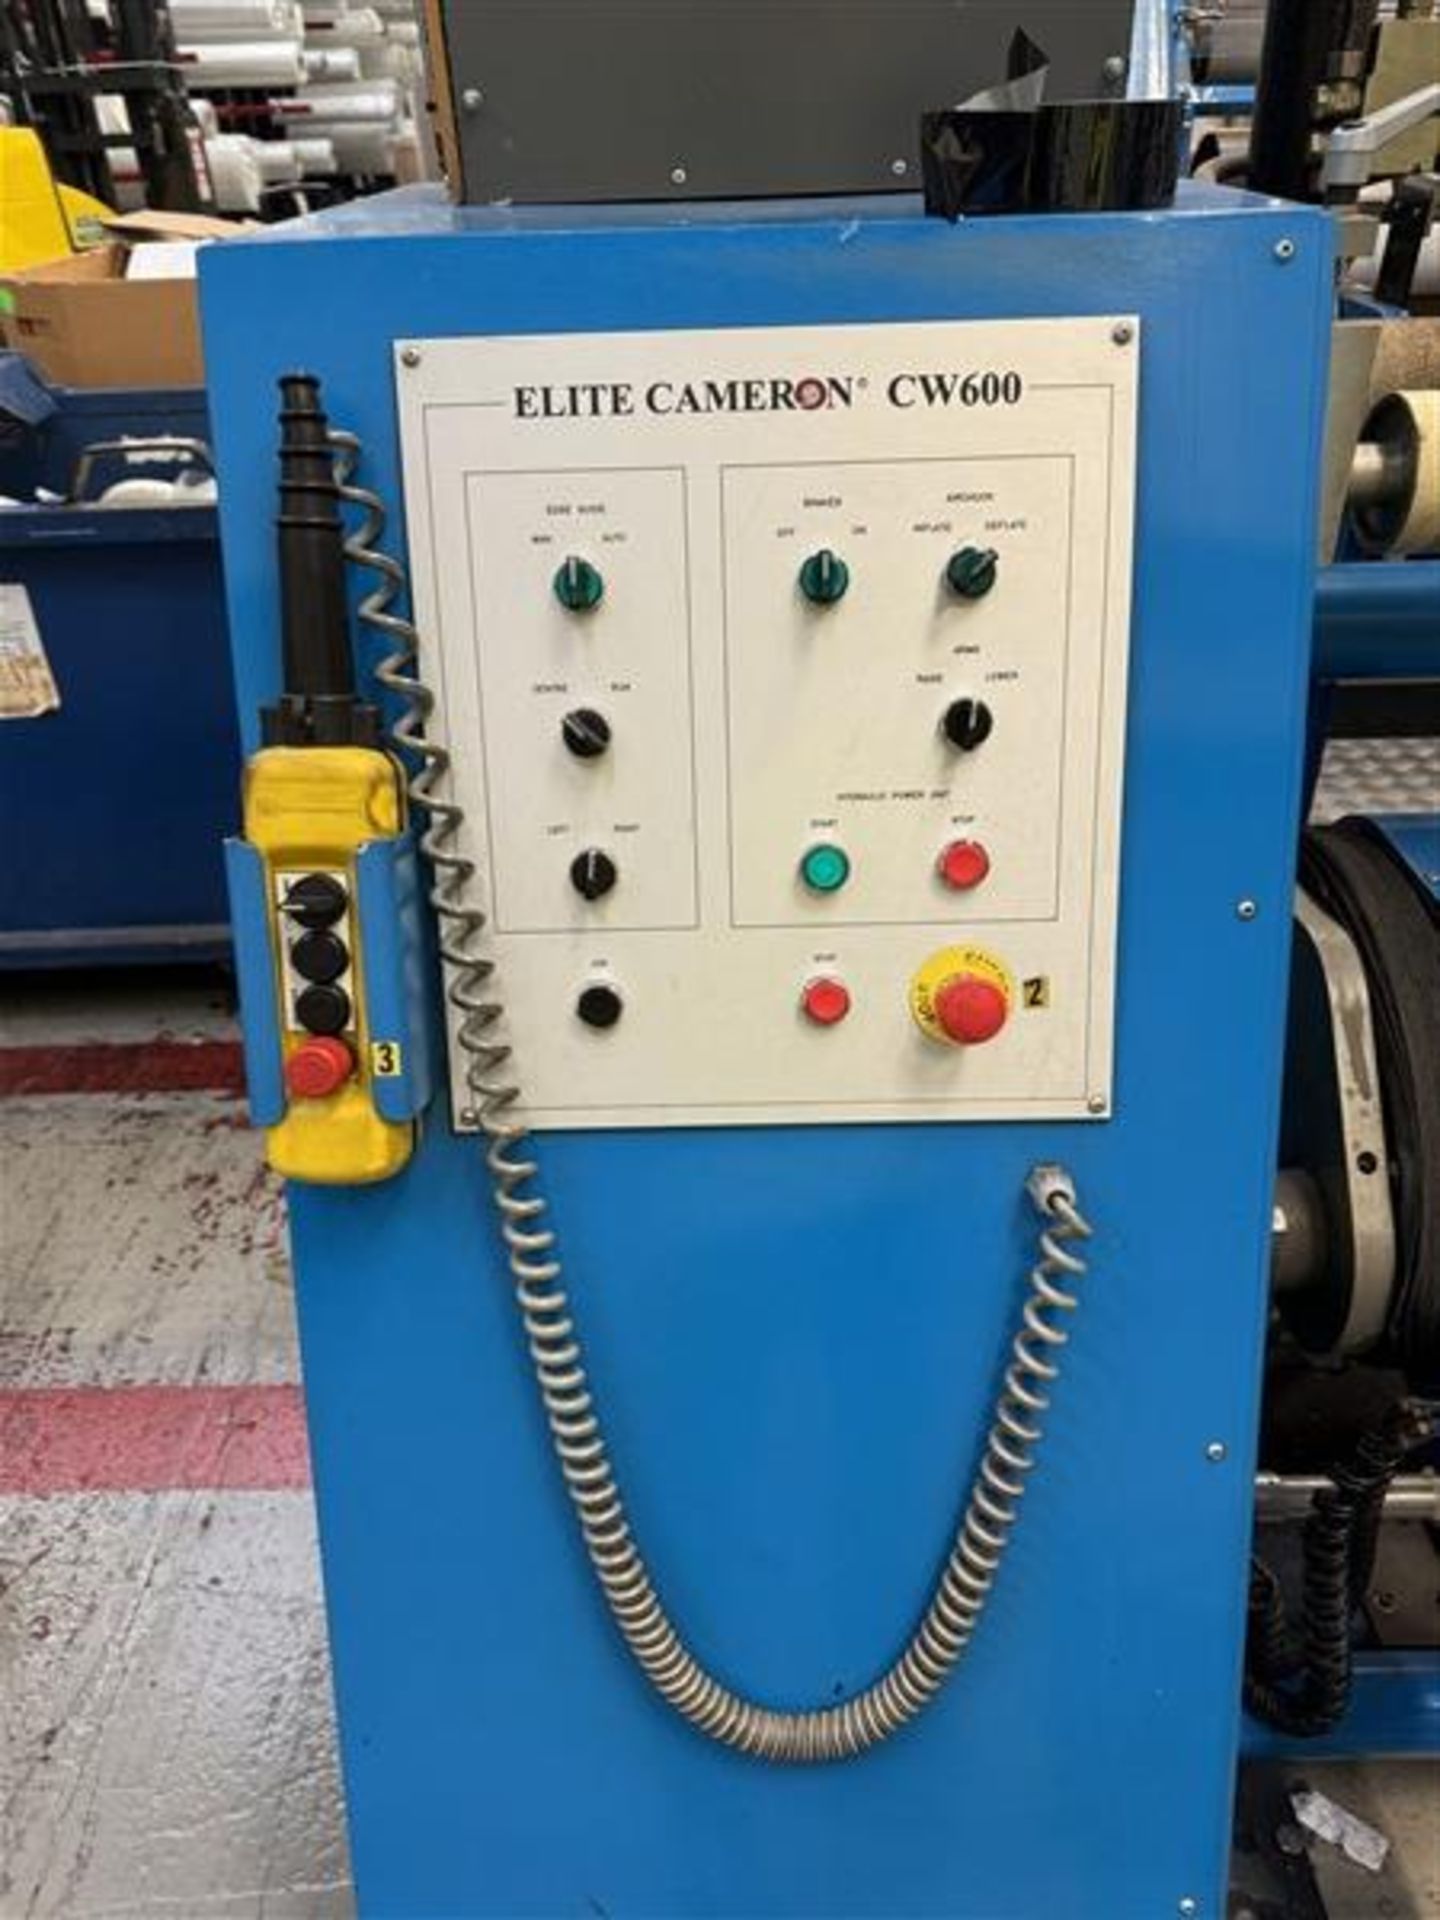 Elite Cameron CW600 automatic slitting machine, serial no. M02030 (2001) A work Method Statement and - Image 12 of 14